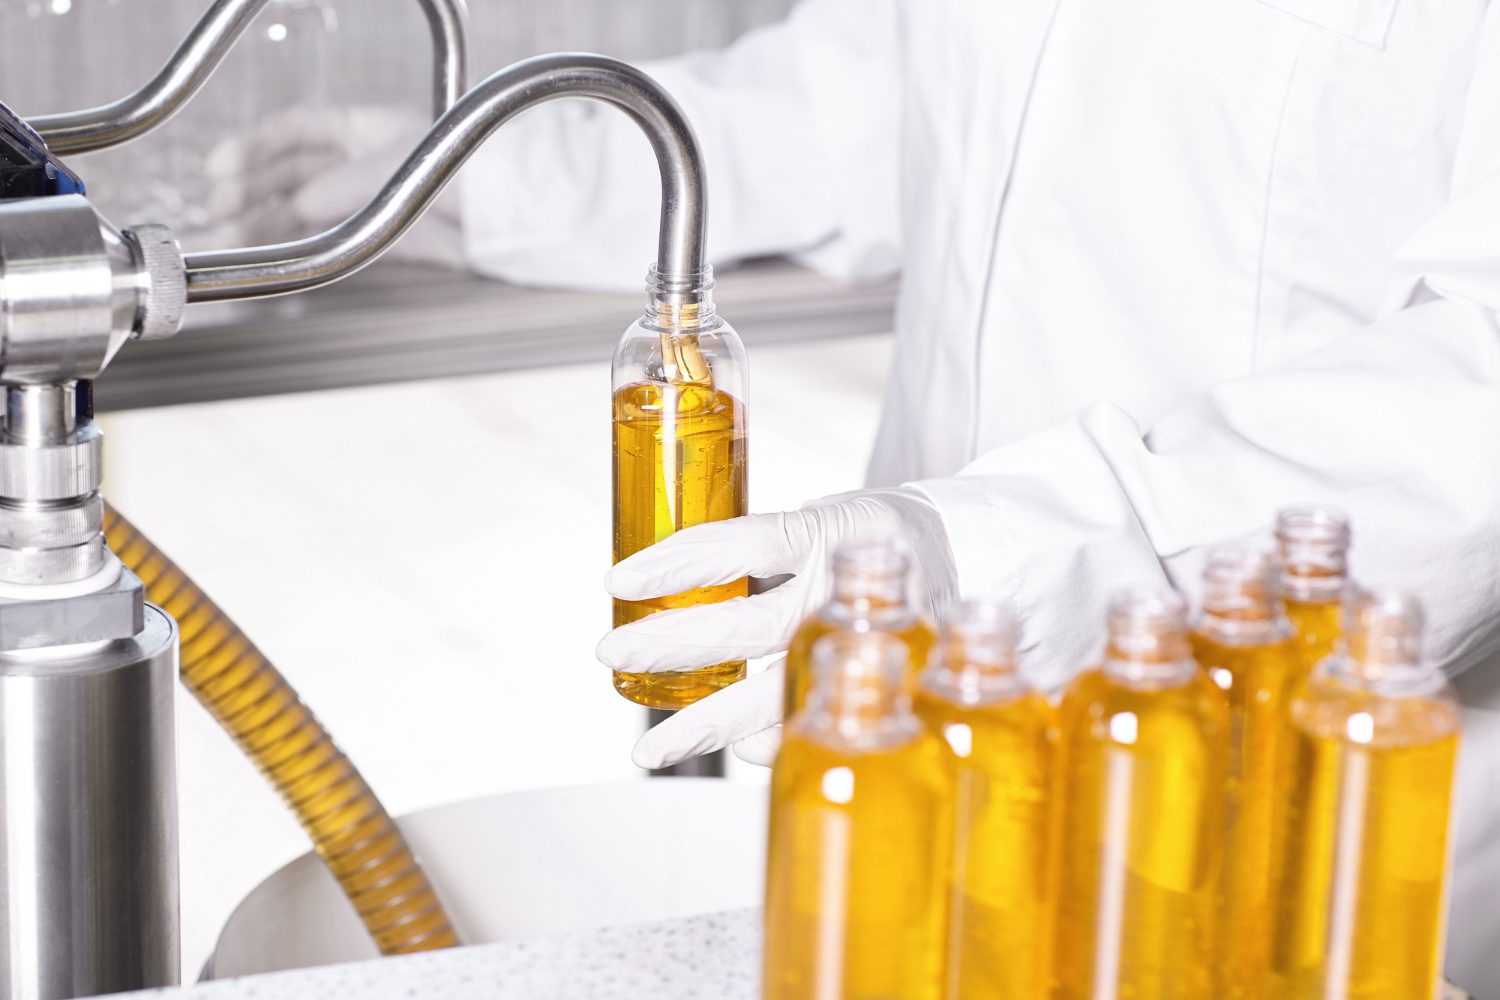 A technician fills bottles with CanolaMAX cooking oil at a processing plant.